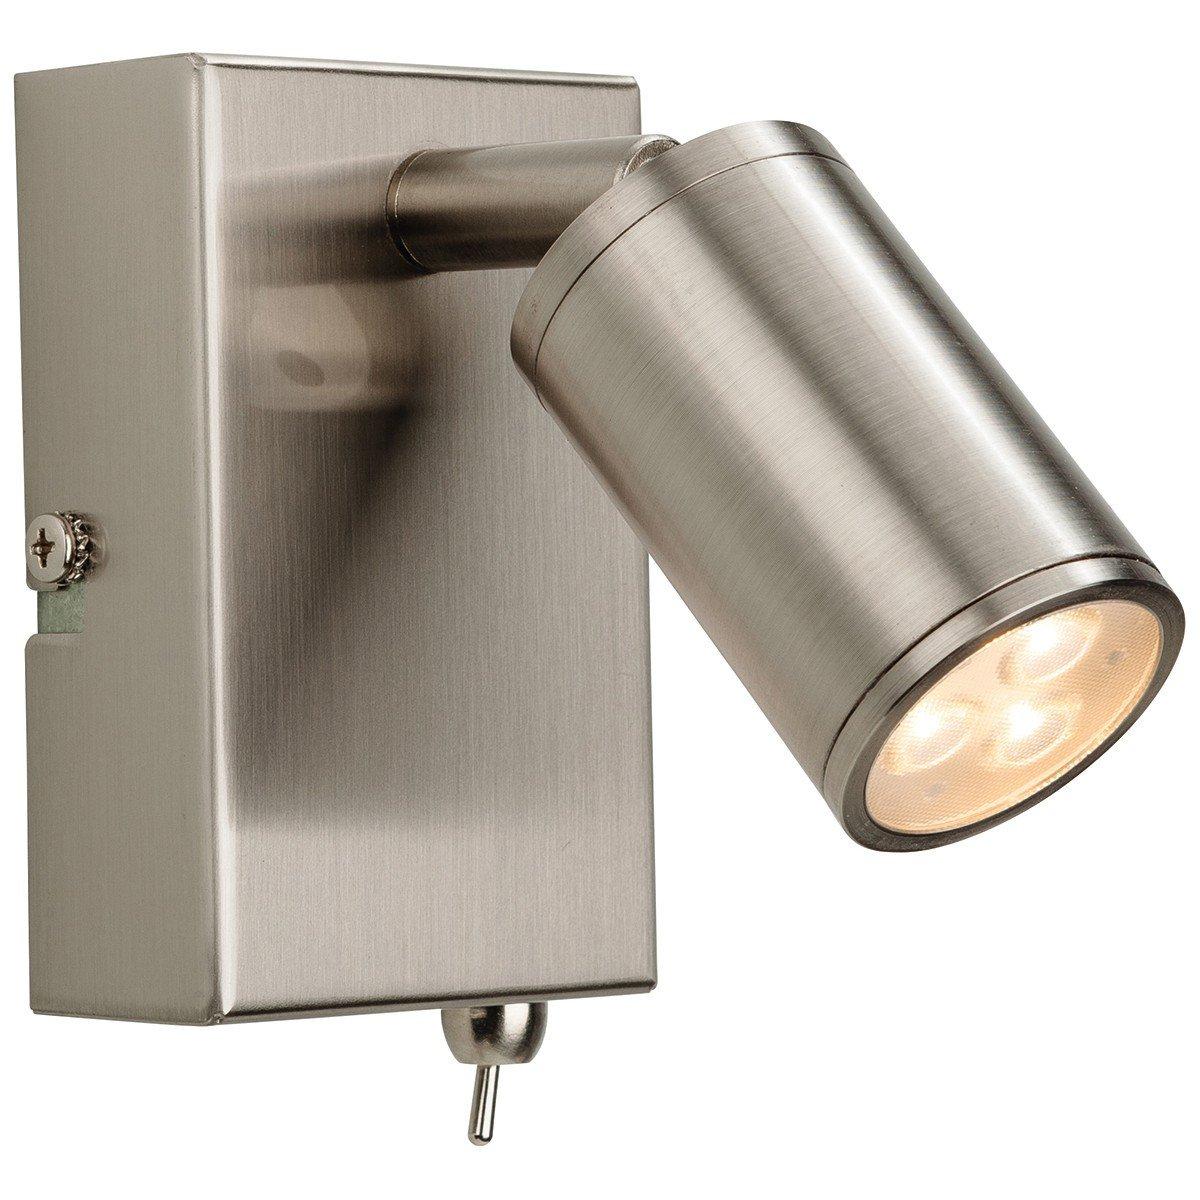 Orion LED 3 Light Indoor Wall Spotlight (Switched) Brushed Steel